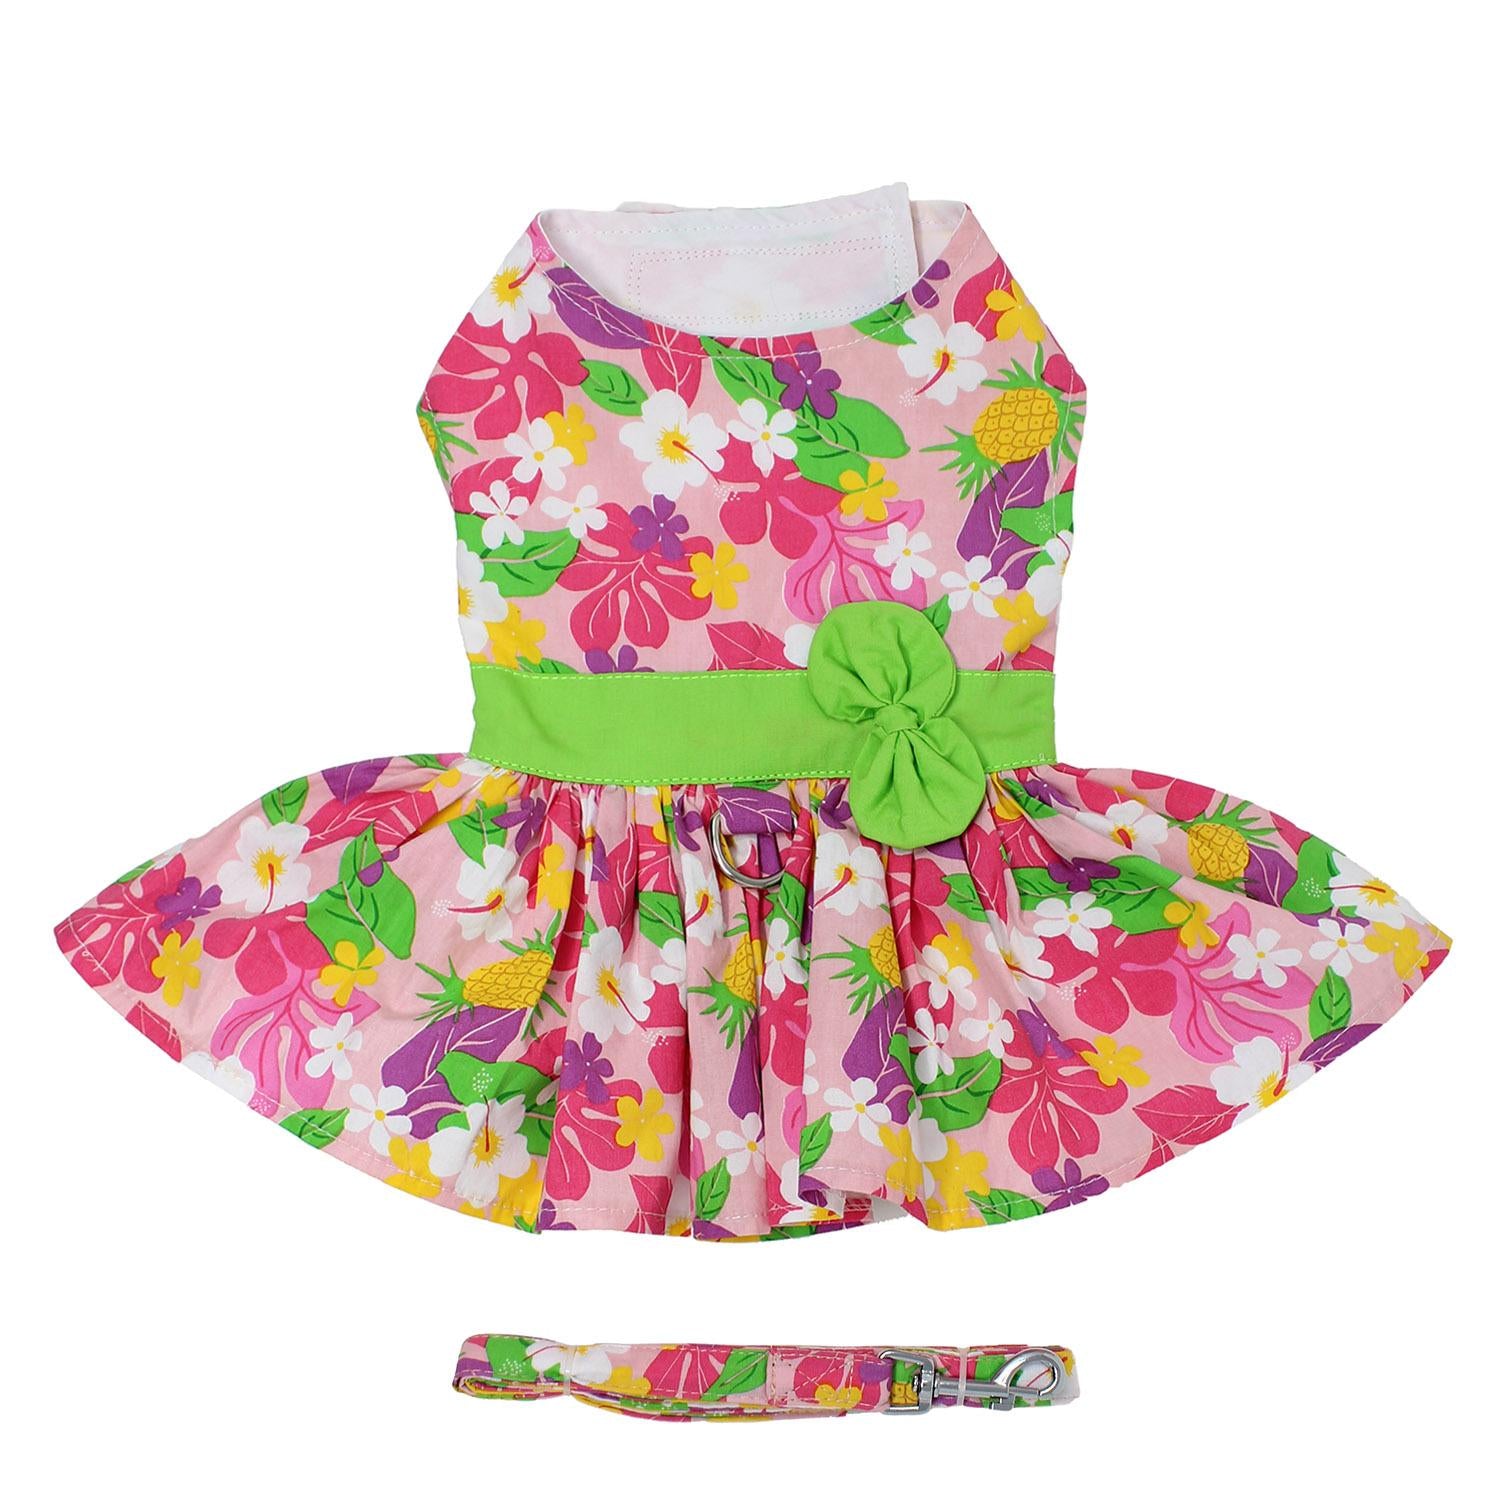 Pink Hawaiian Floral Dog Harness Dress with Matching Leash - Trendy Dog Boutique